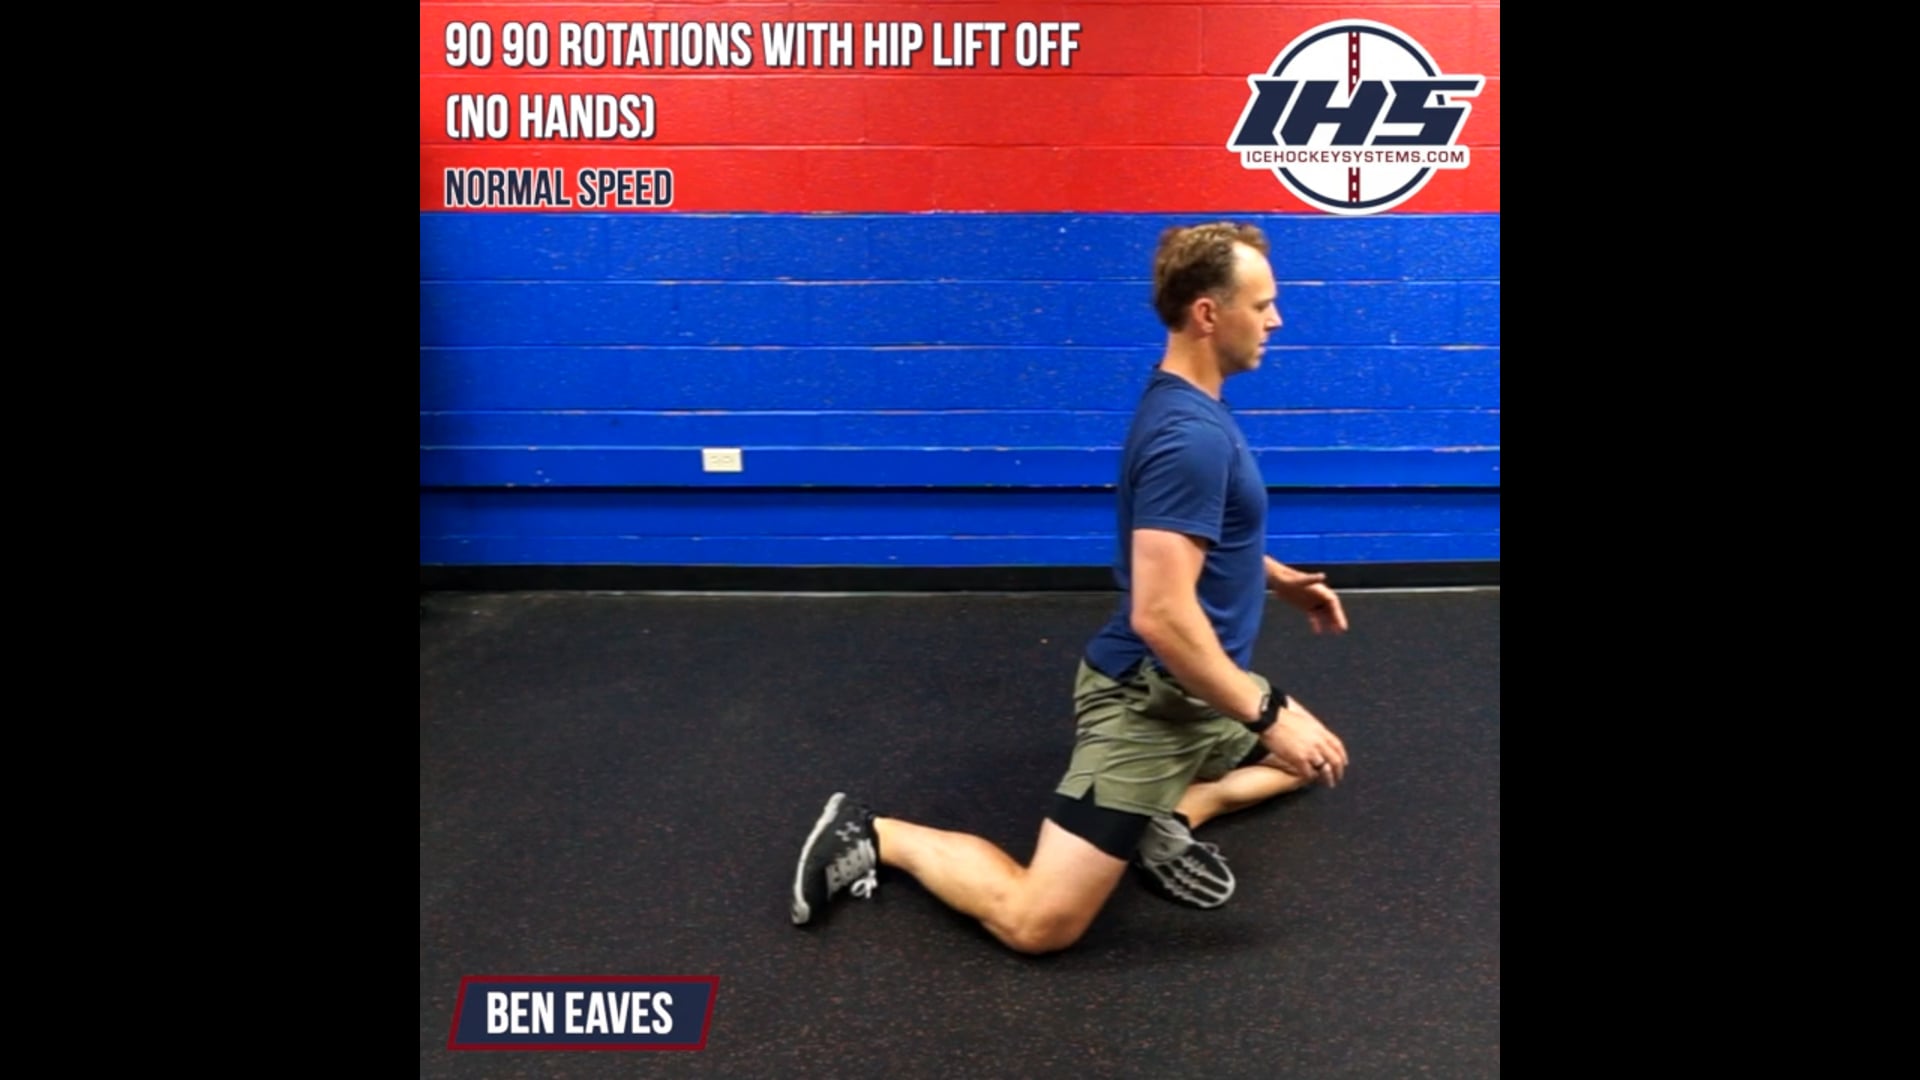 90 90 Rotations With Hip Lift Off (No Hands)